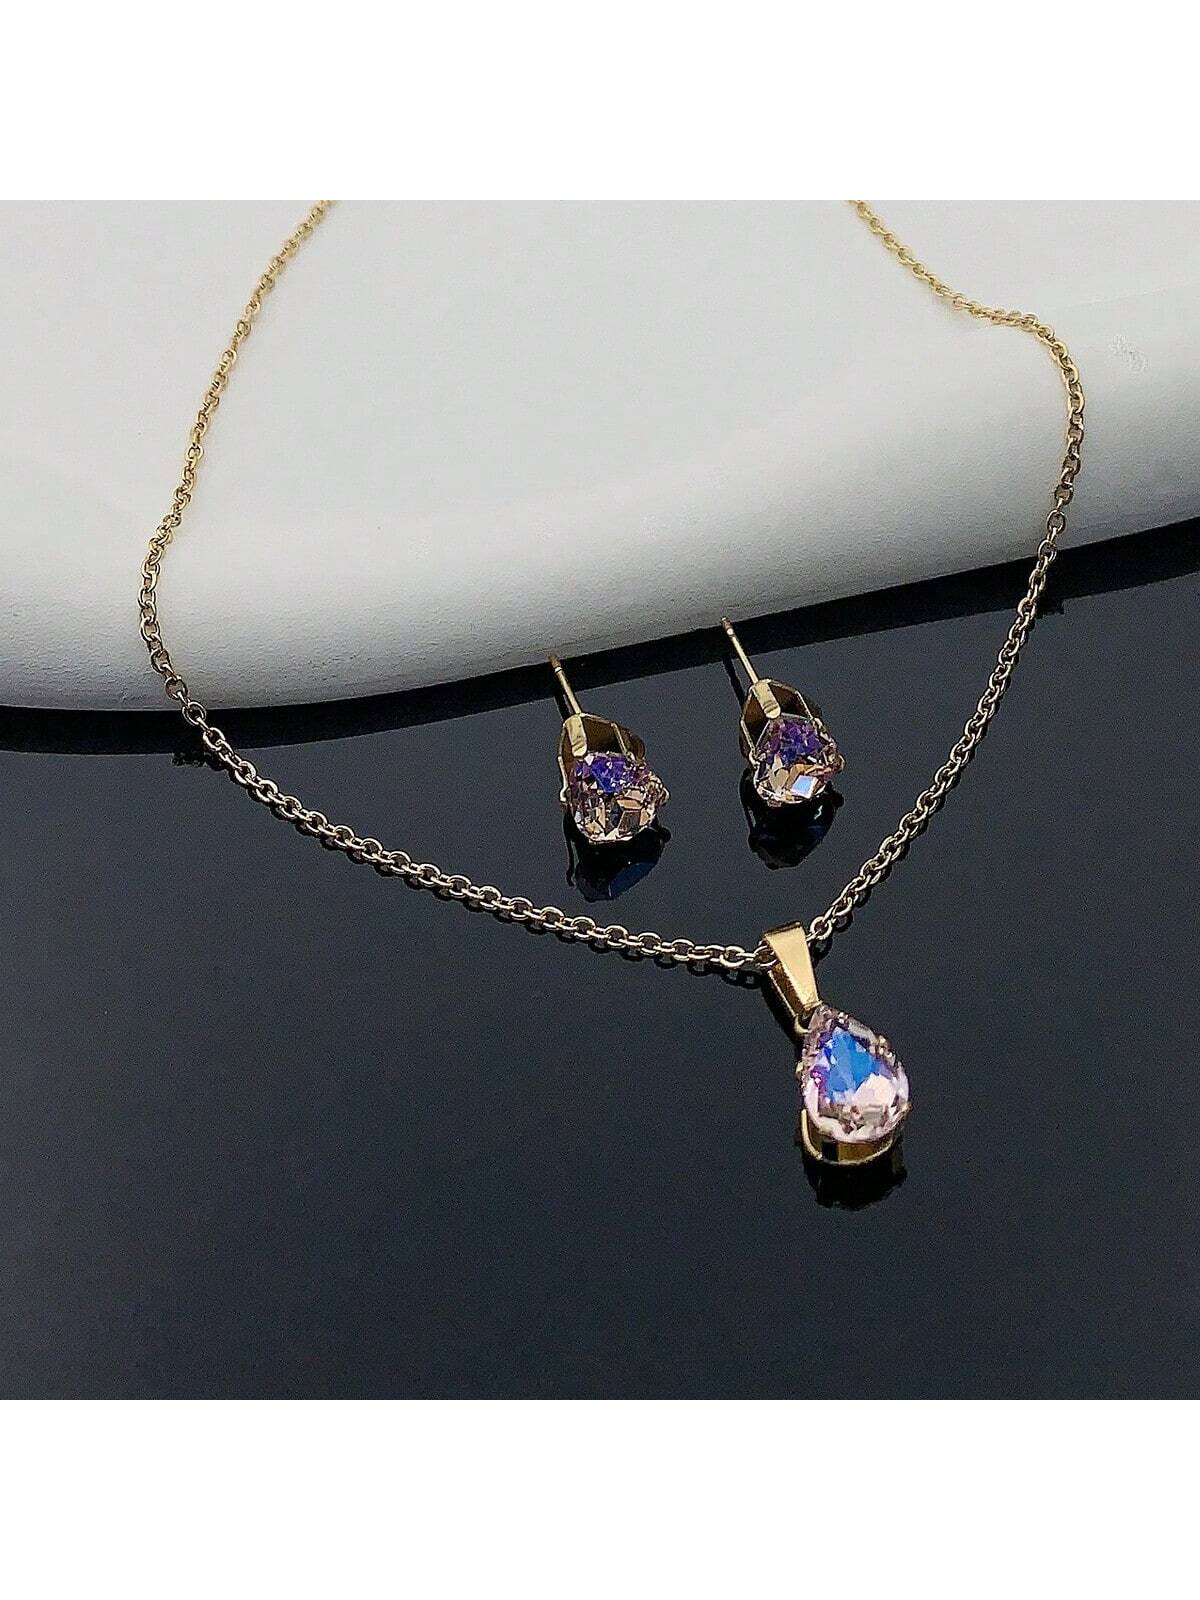 3pcs/Set Gold-Tone Stainless Steel Waterdrop Cubic Zirconia Pendant Necklace And Stud Earrings Set